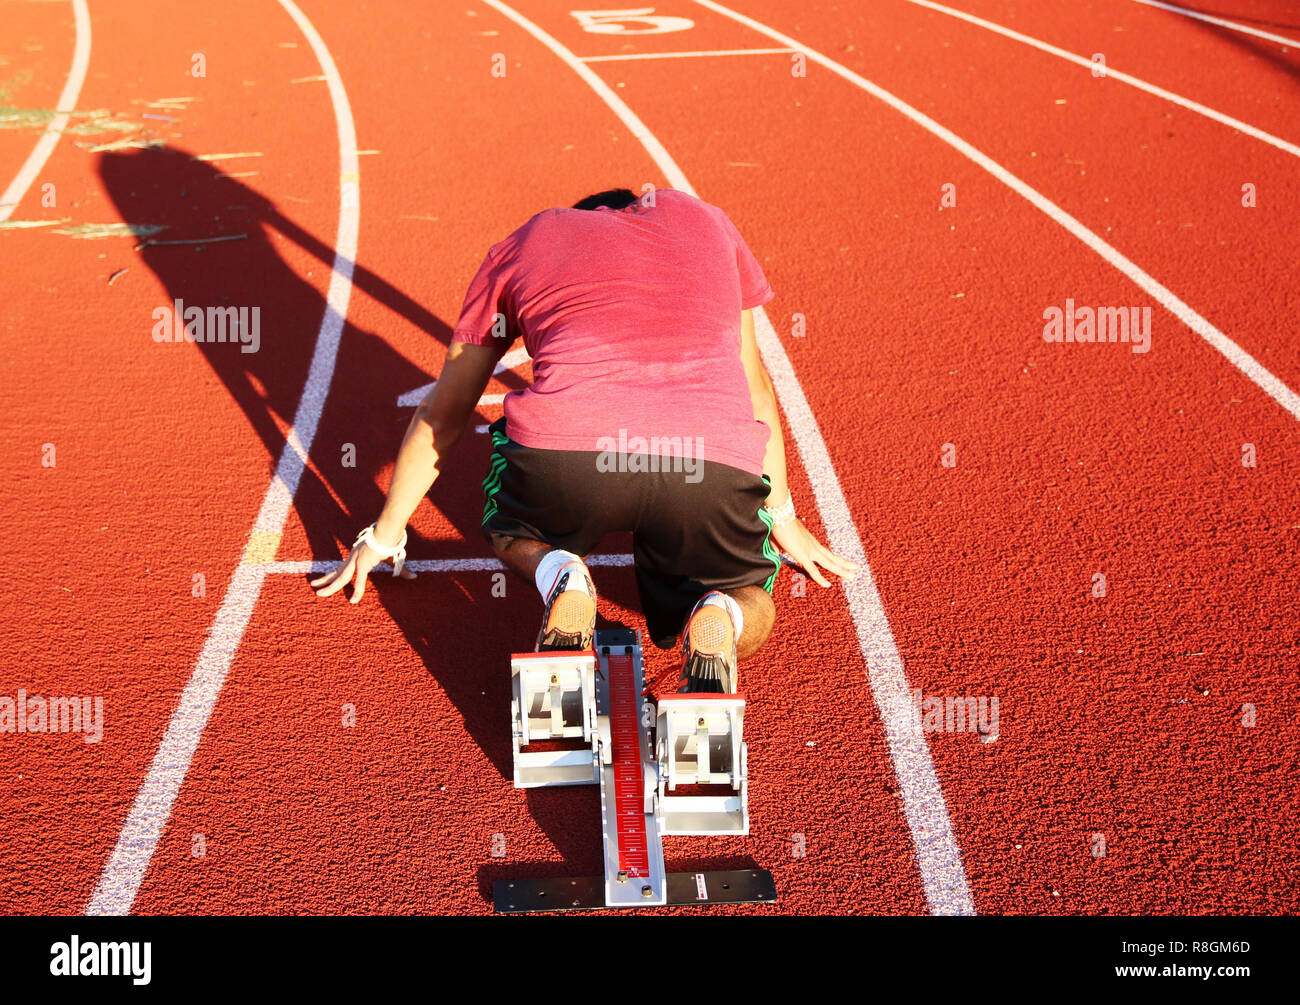 A track and field sprinter is in the starting blocks in the on your mark position at practice on a sunny summer day. Stock Photo